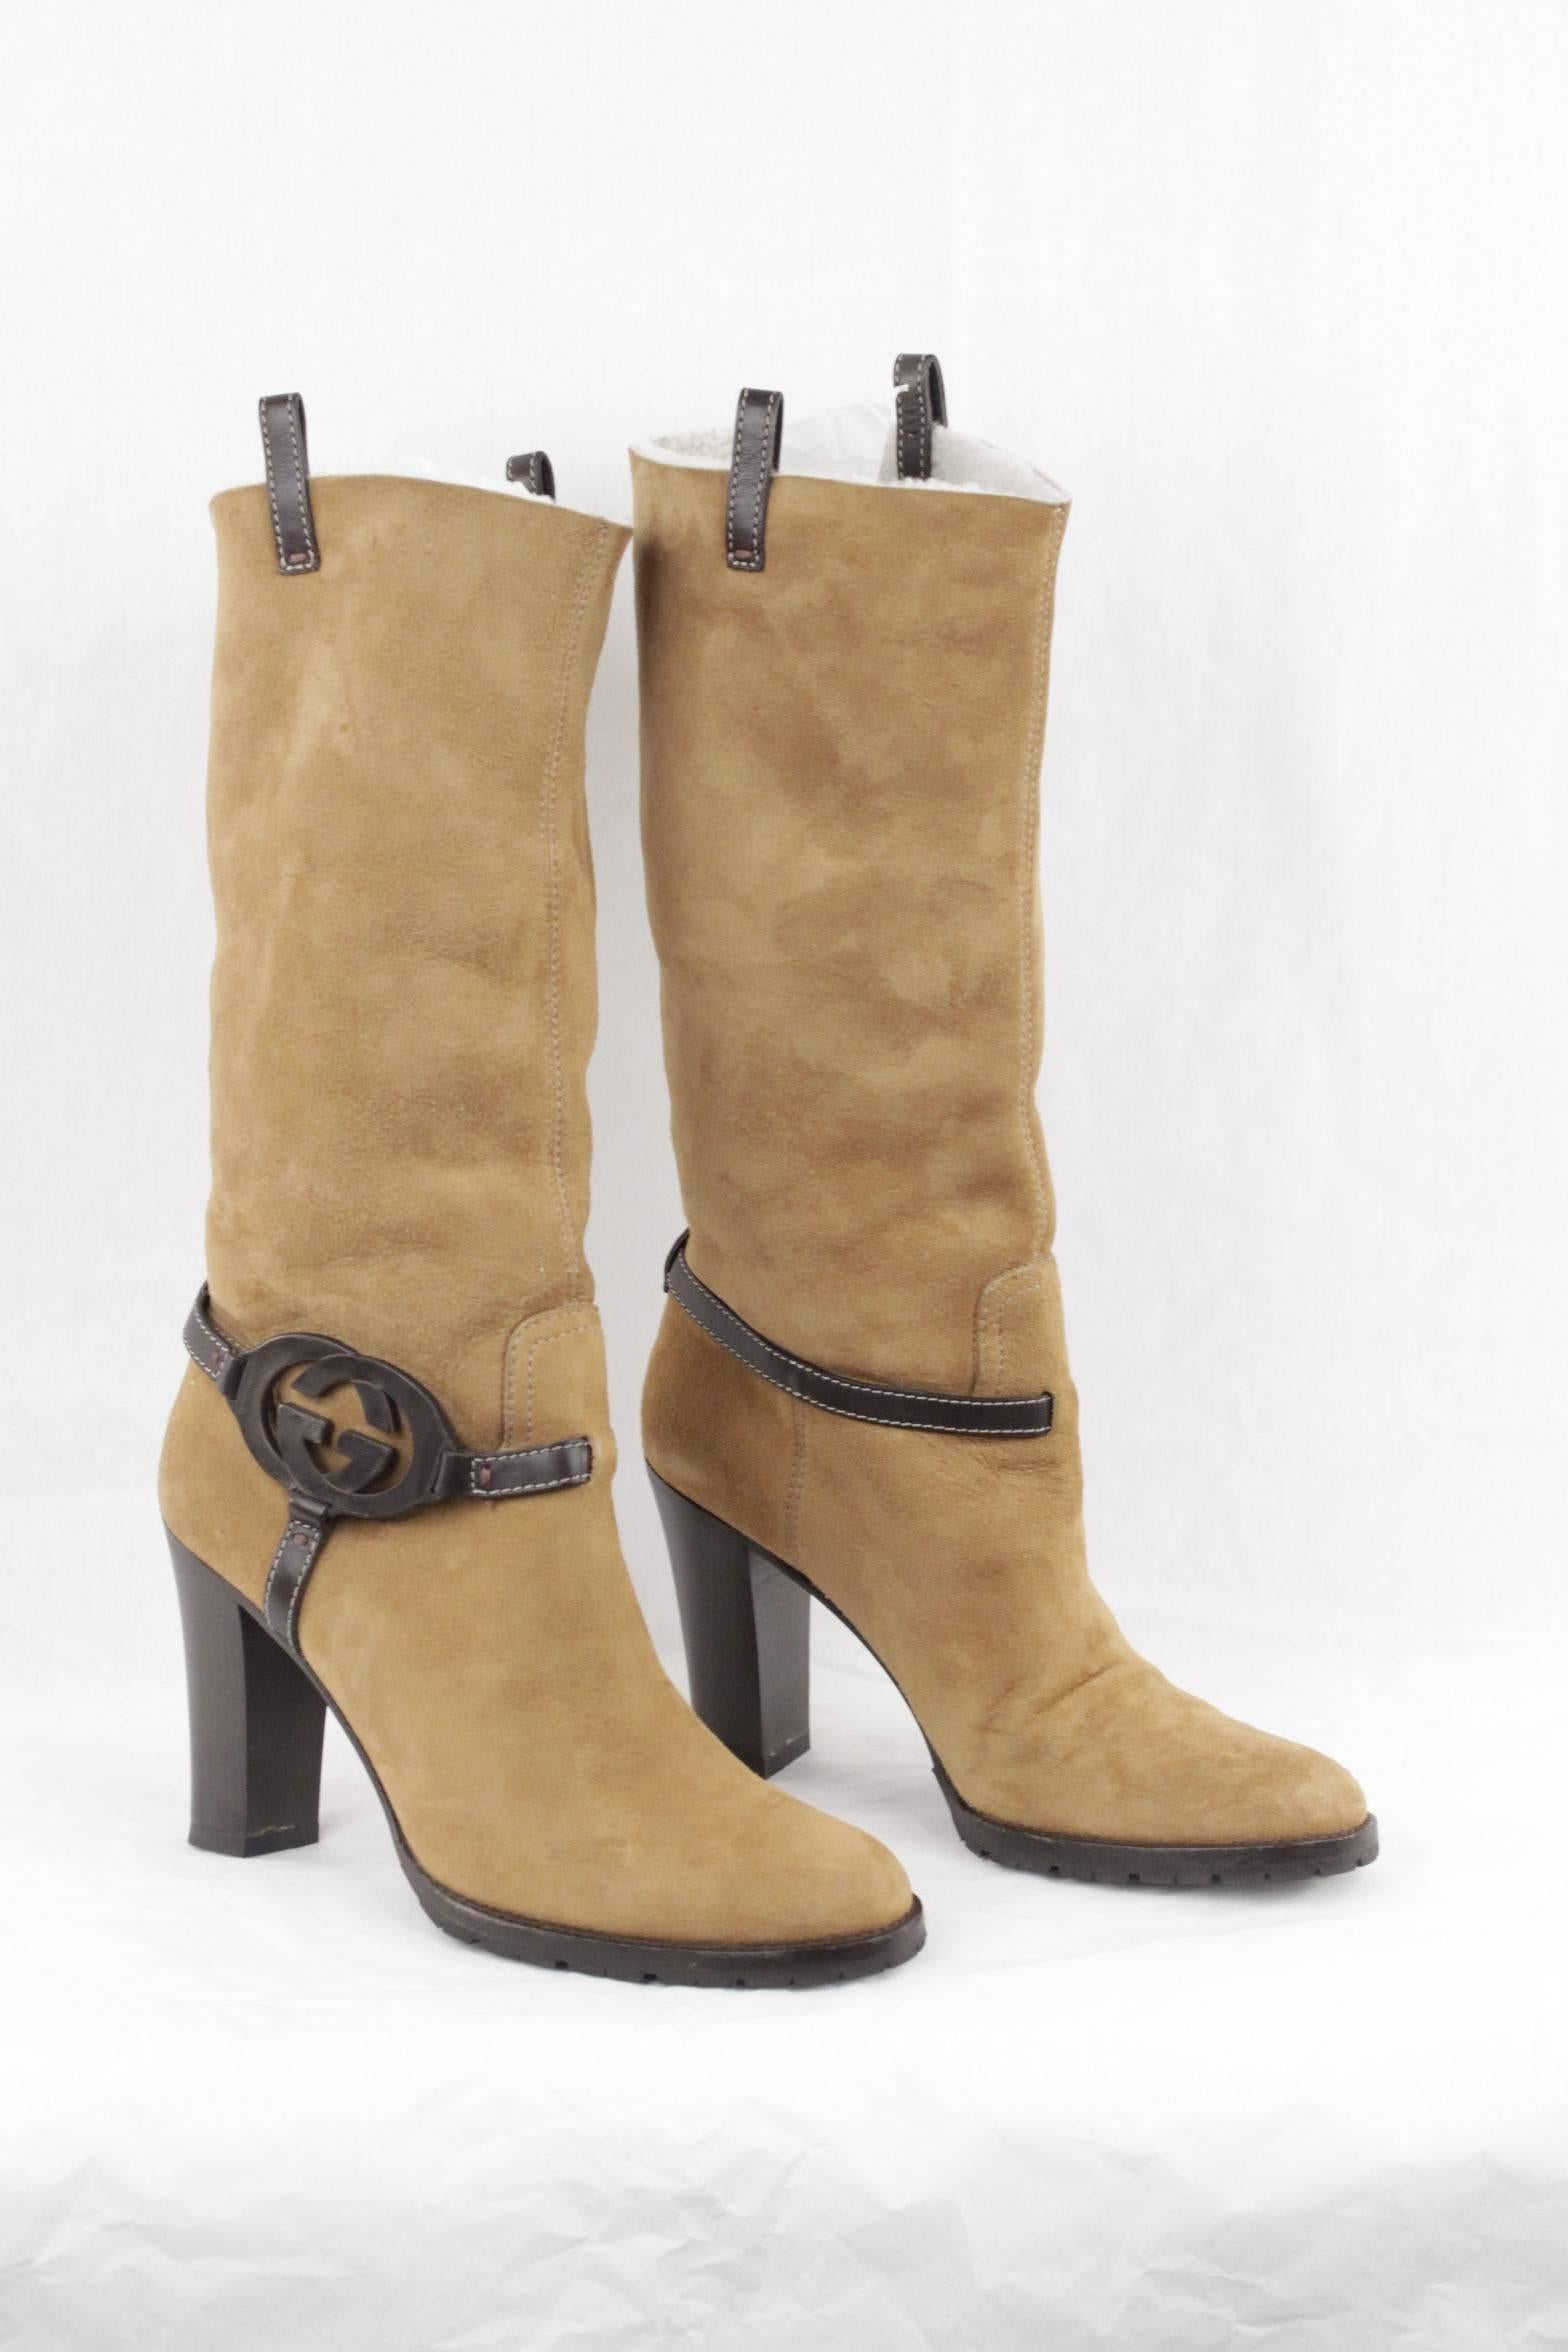 Brown GUCCI Beige Suede HEELED BOOTS Shearling Lining GG LOGO Size 38 1/2